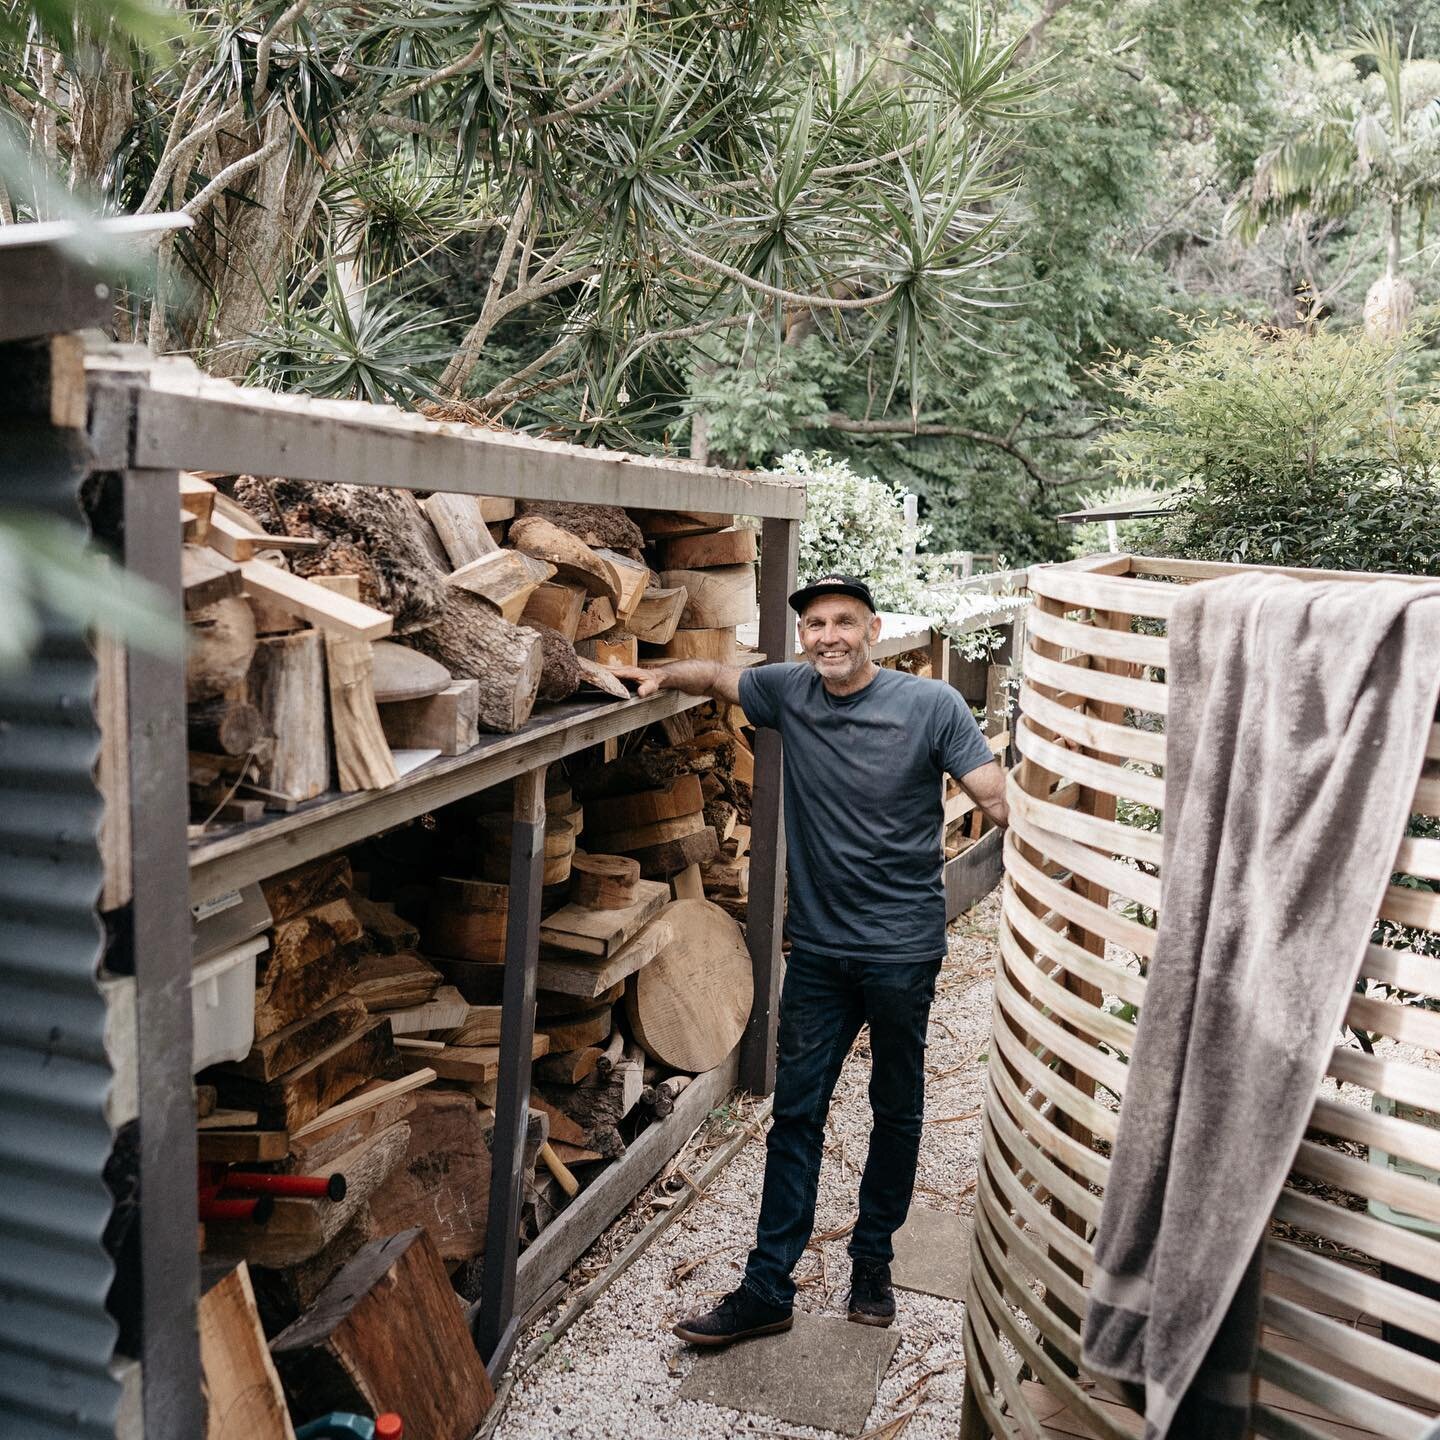 WOOD STORIES // 🪵
Former high school woodwork teacher and master craftsman, Brett Davis has held a lifelong passion for all things timber. But it is his connection to community and faith through woodwork that tells an even greater story.

As intere